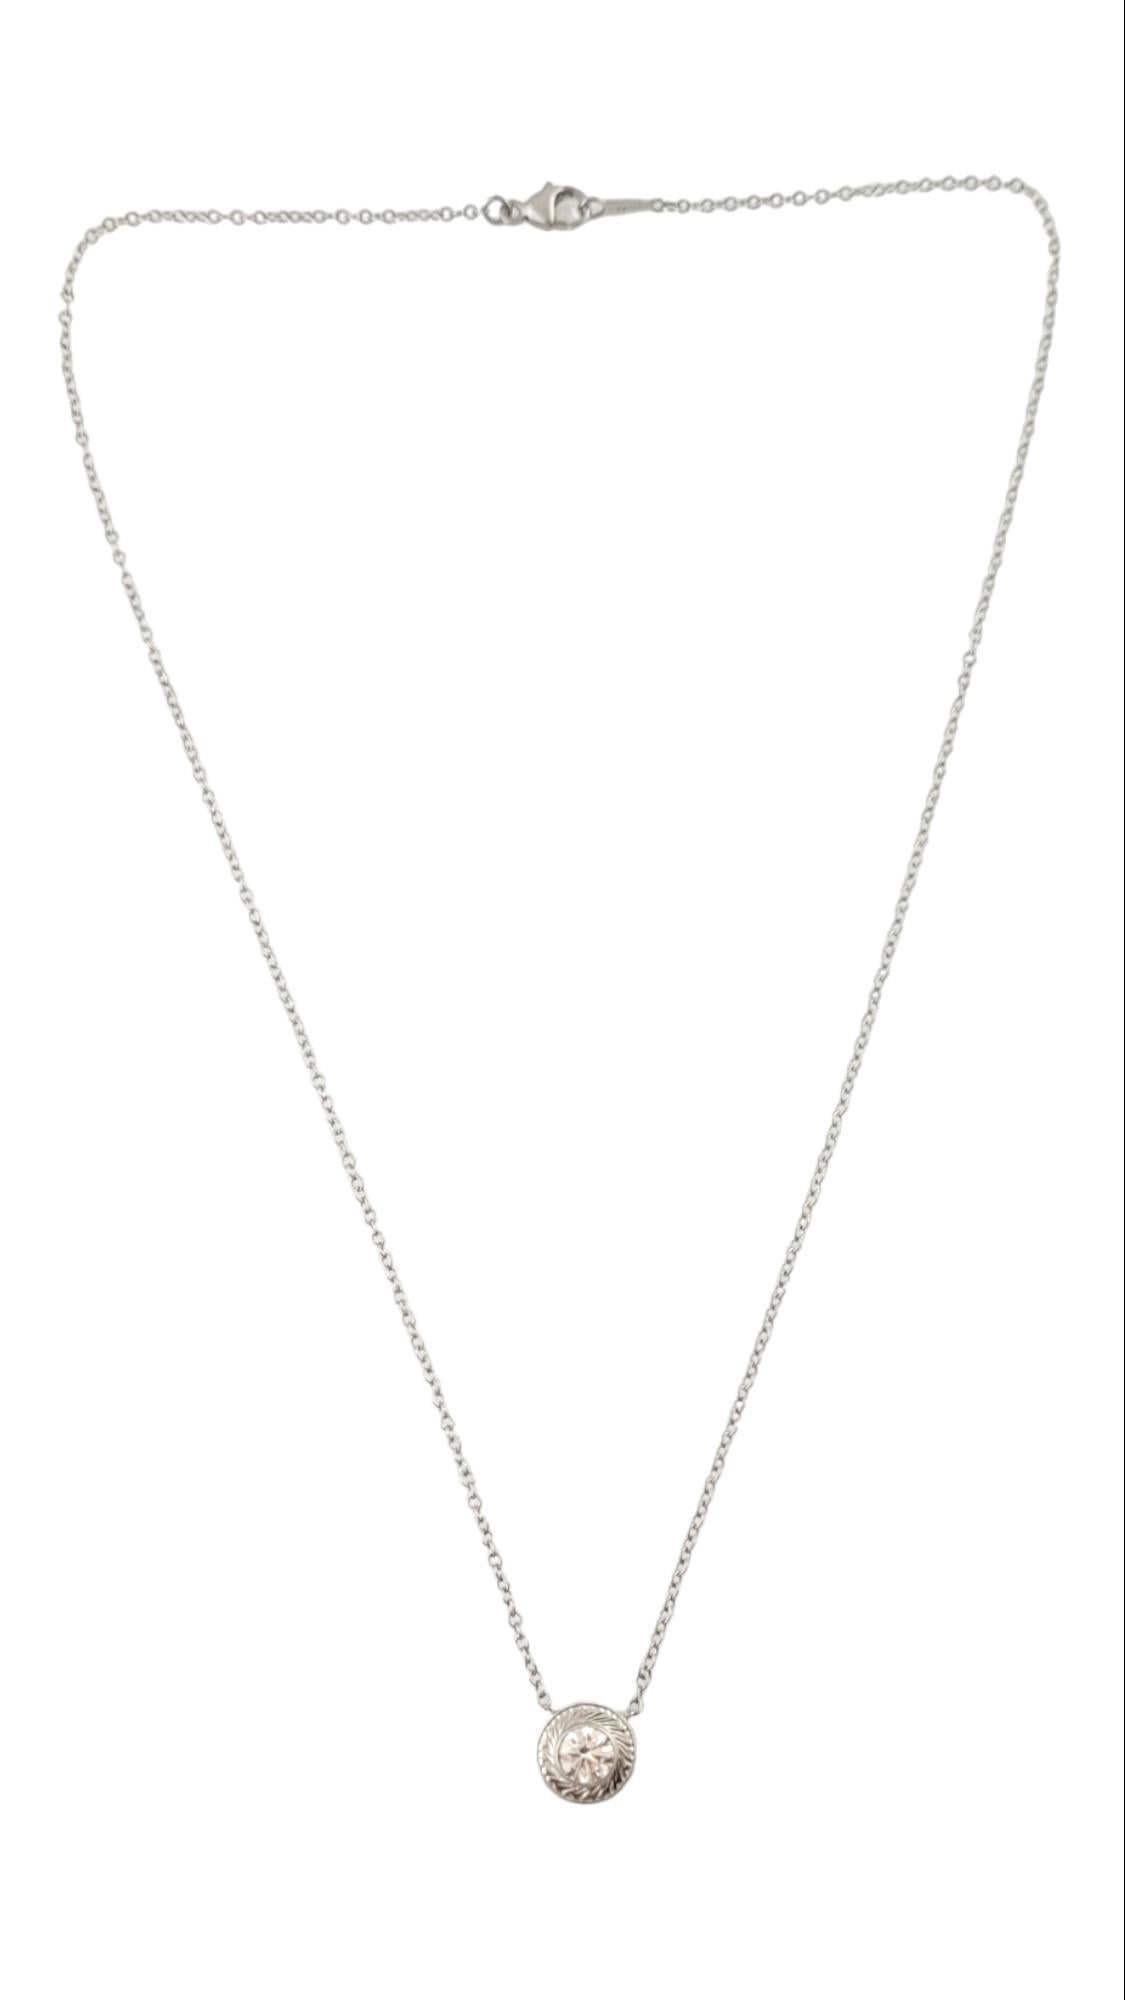 Brilliant Cut Platinum and 18K Yellow Gold Diamond Pendant and Chain #15931 For Sale